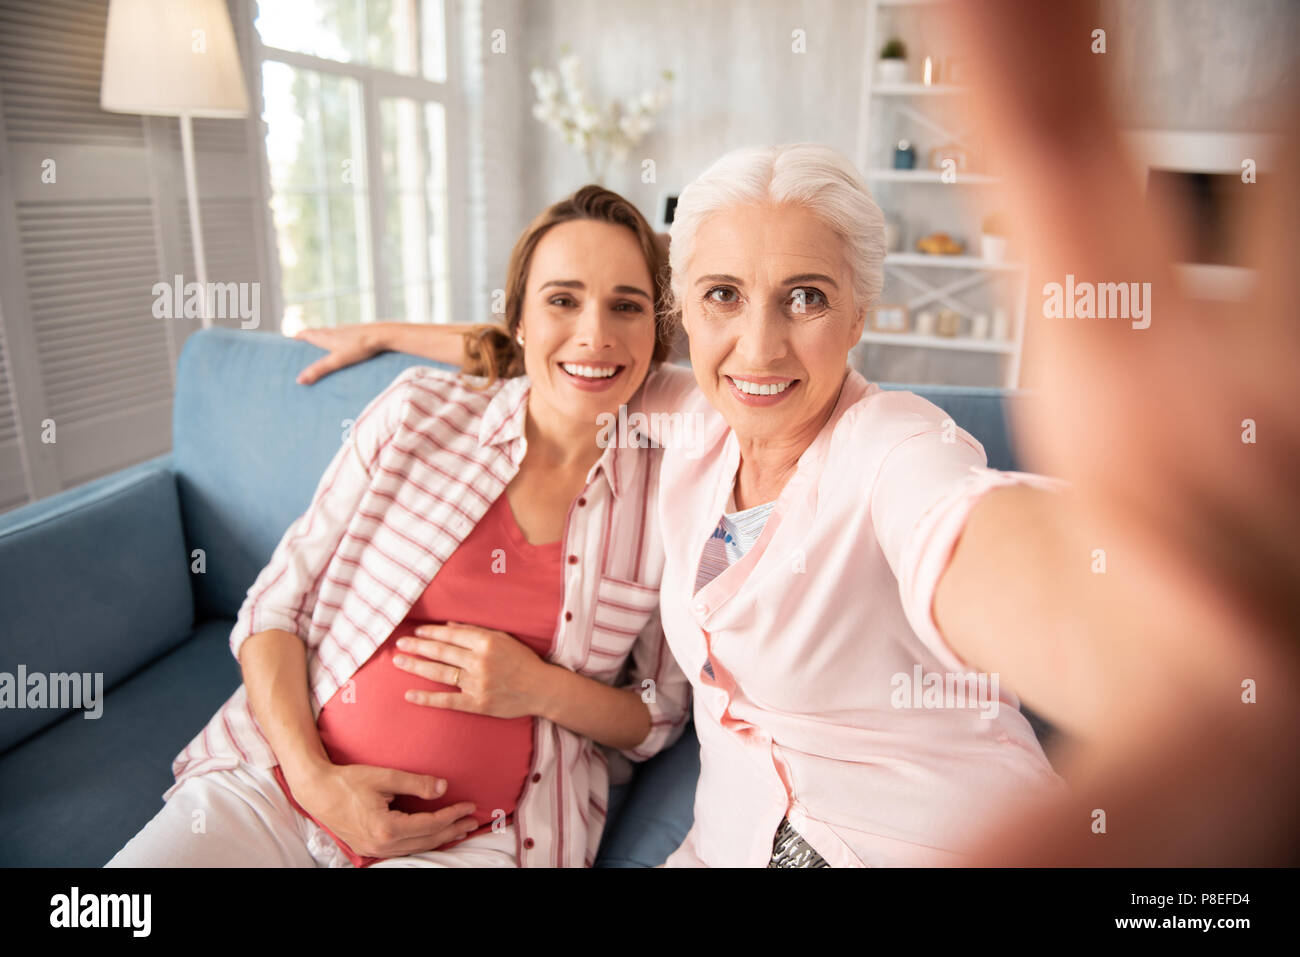 Pregnant woman wearing striped shirt sitting on sofa near her old friend Stock Photo